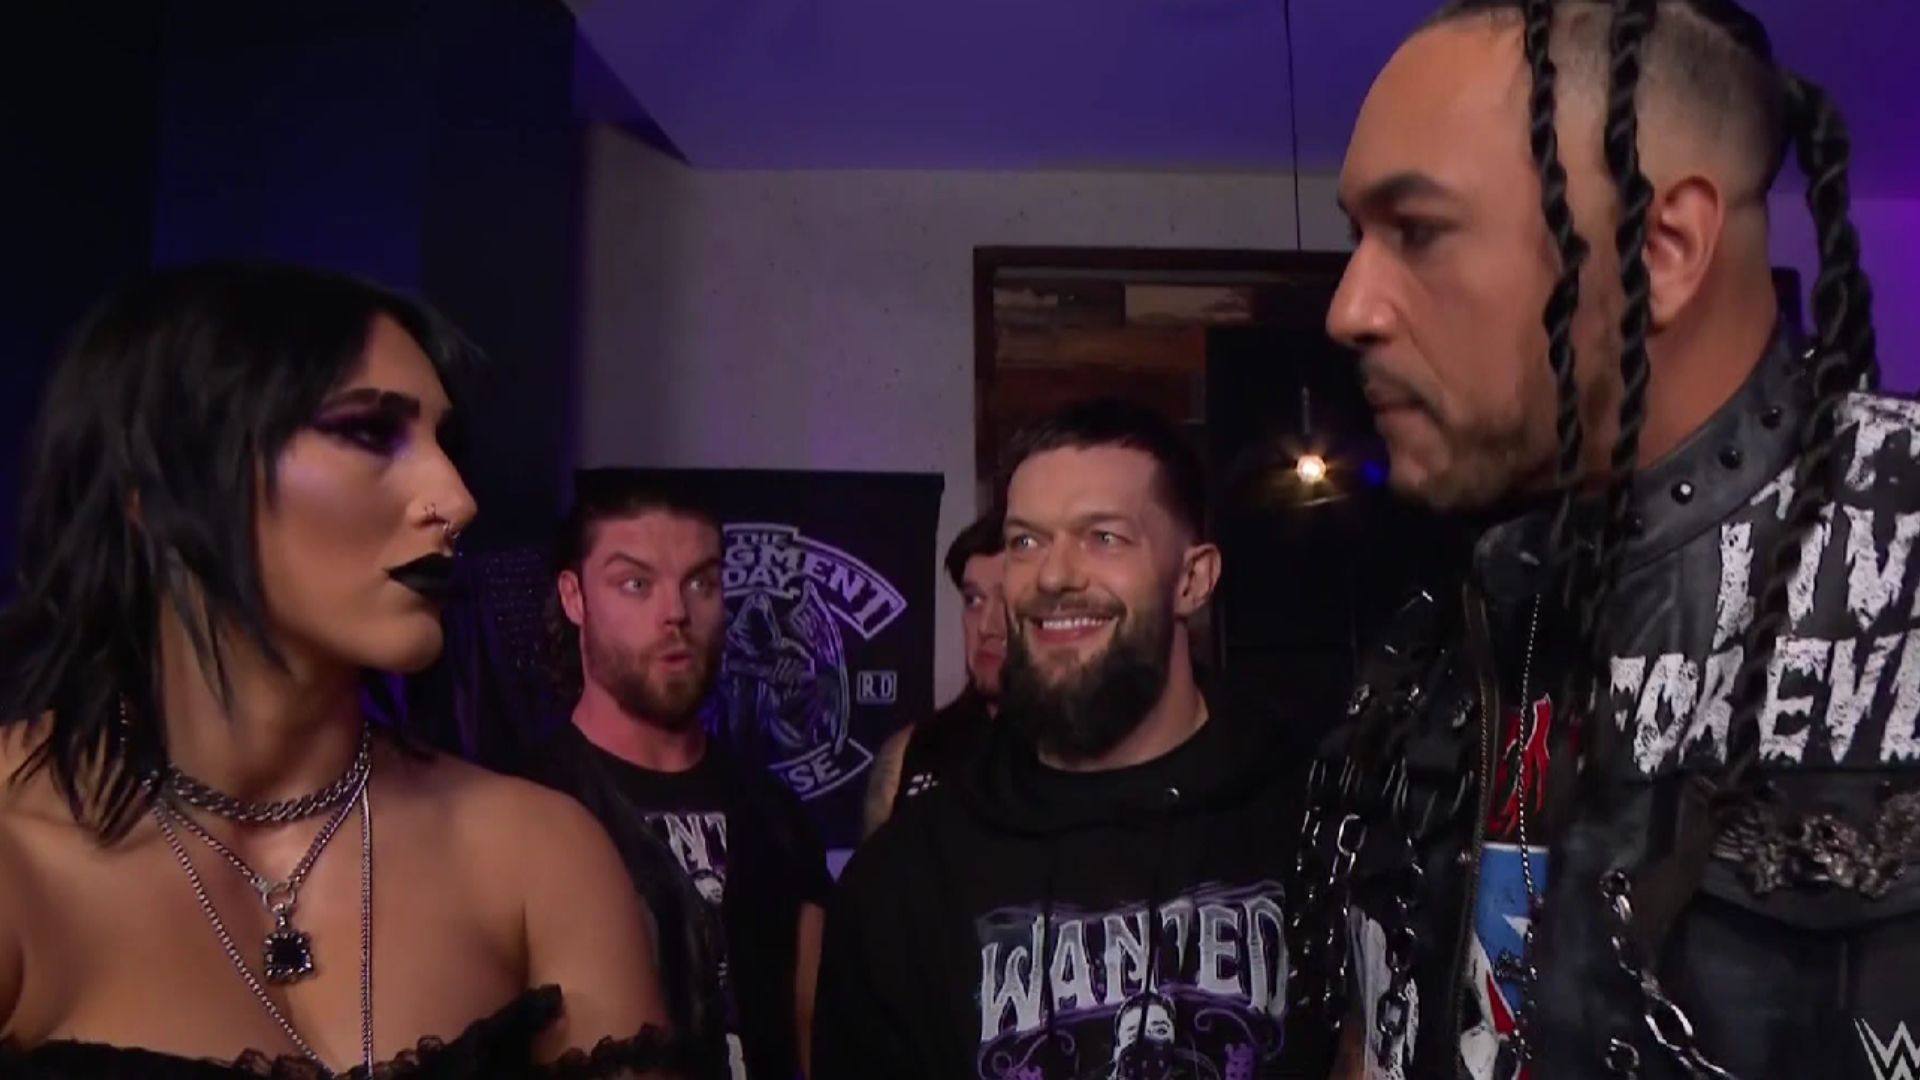 The Judgment Day backstage at RAW (Image credits: WWE RAW SonyLiv)